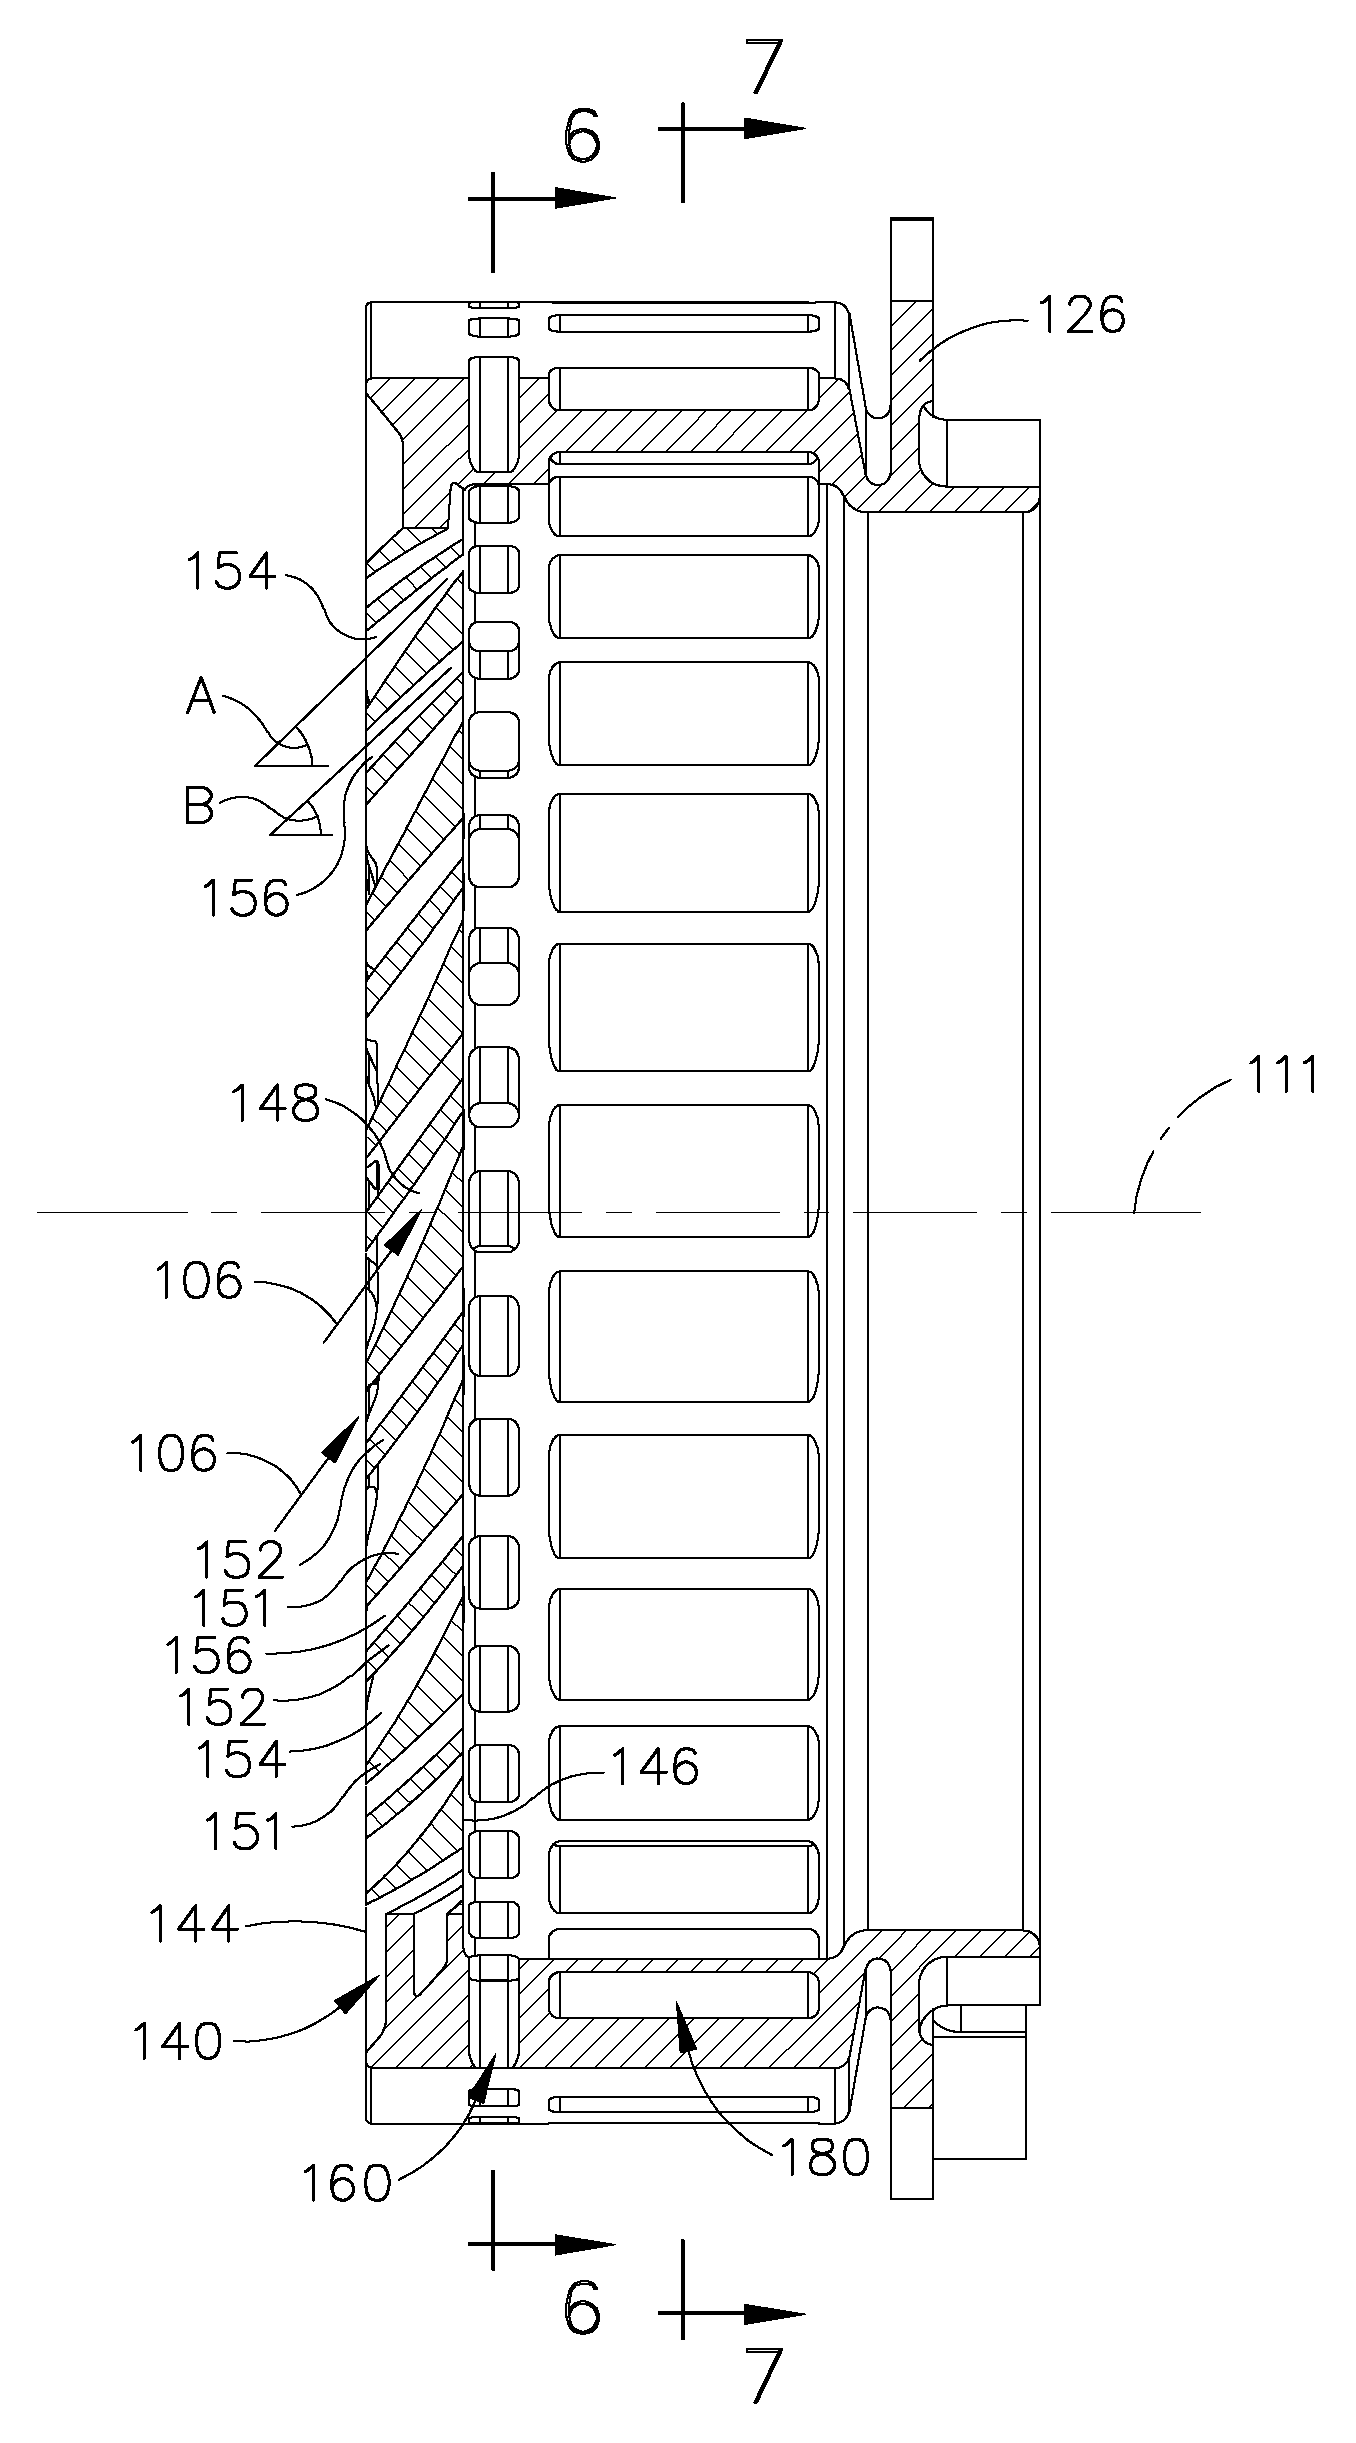 Method of manufacturing mixers